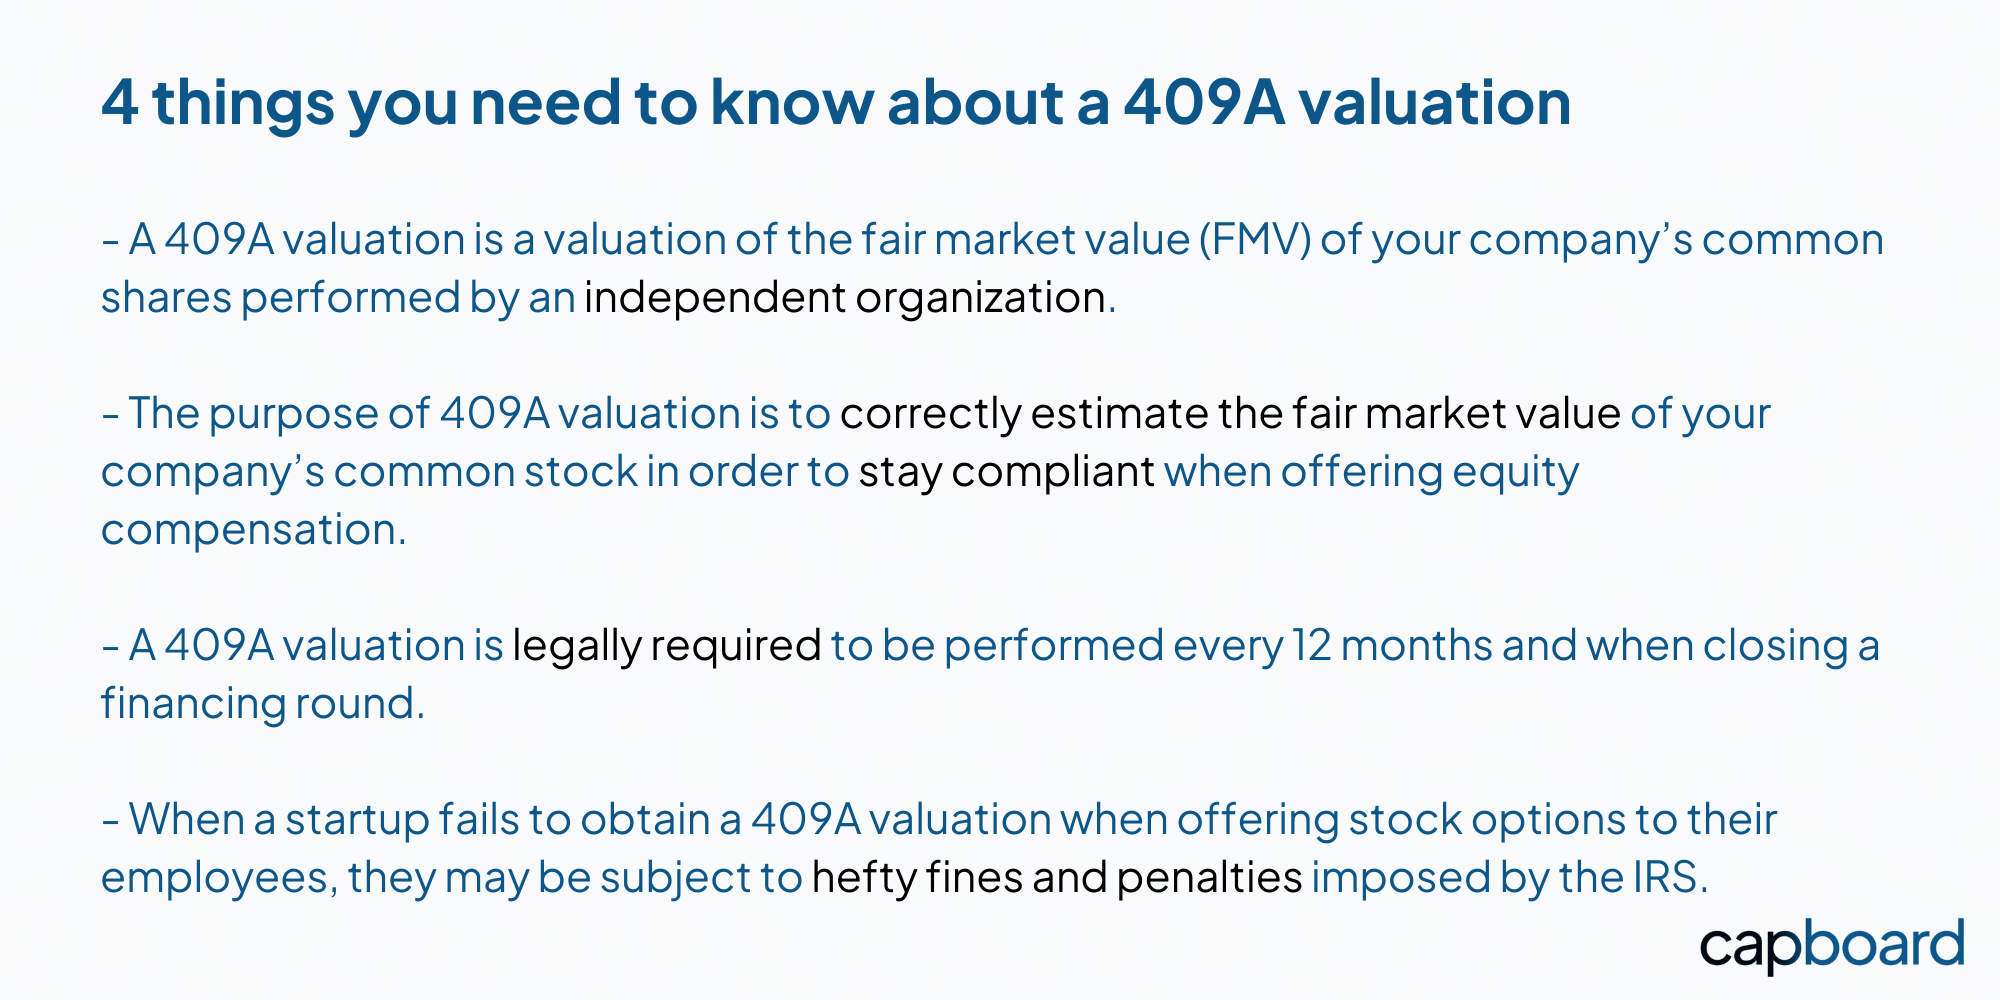 4 things to know about 409A valuations